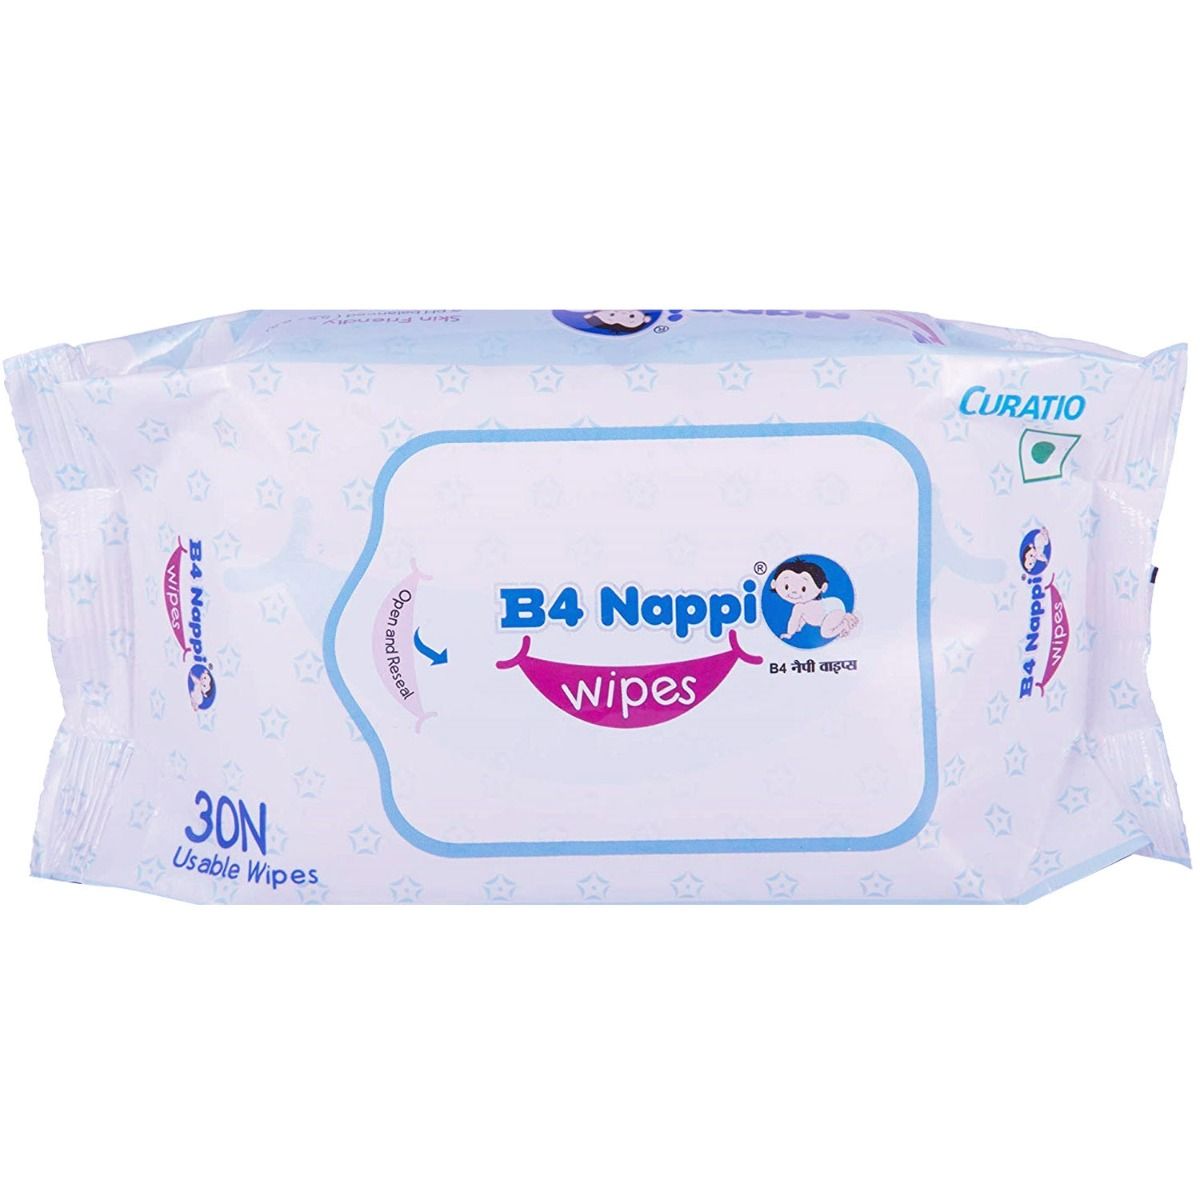 B4-Nappi Wipes, 30 Count, Pack of 1 